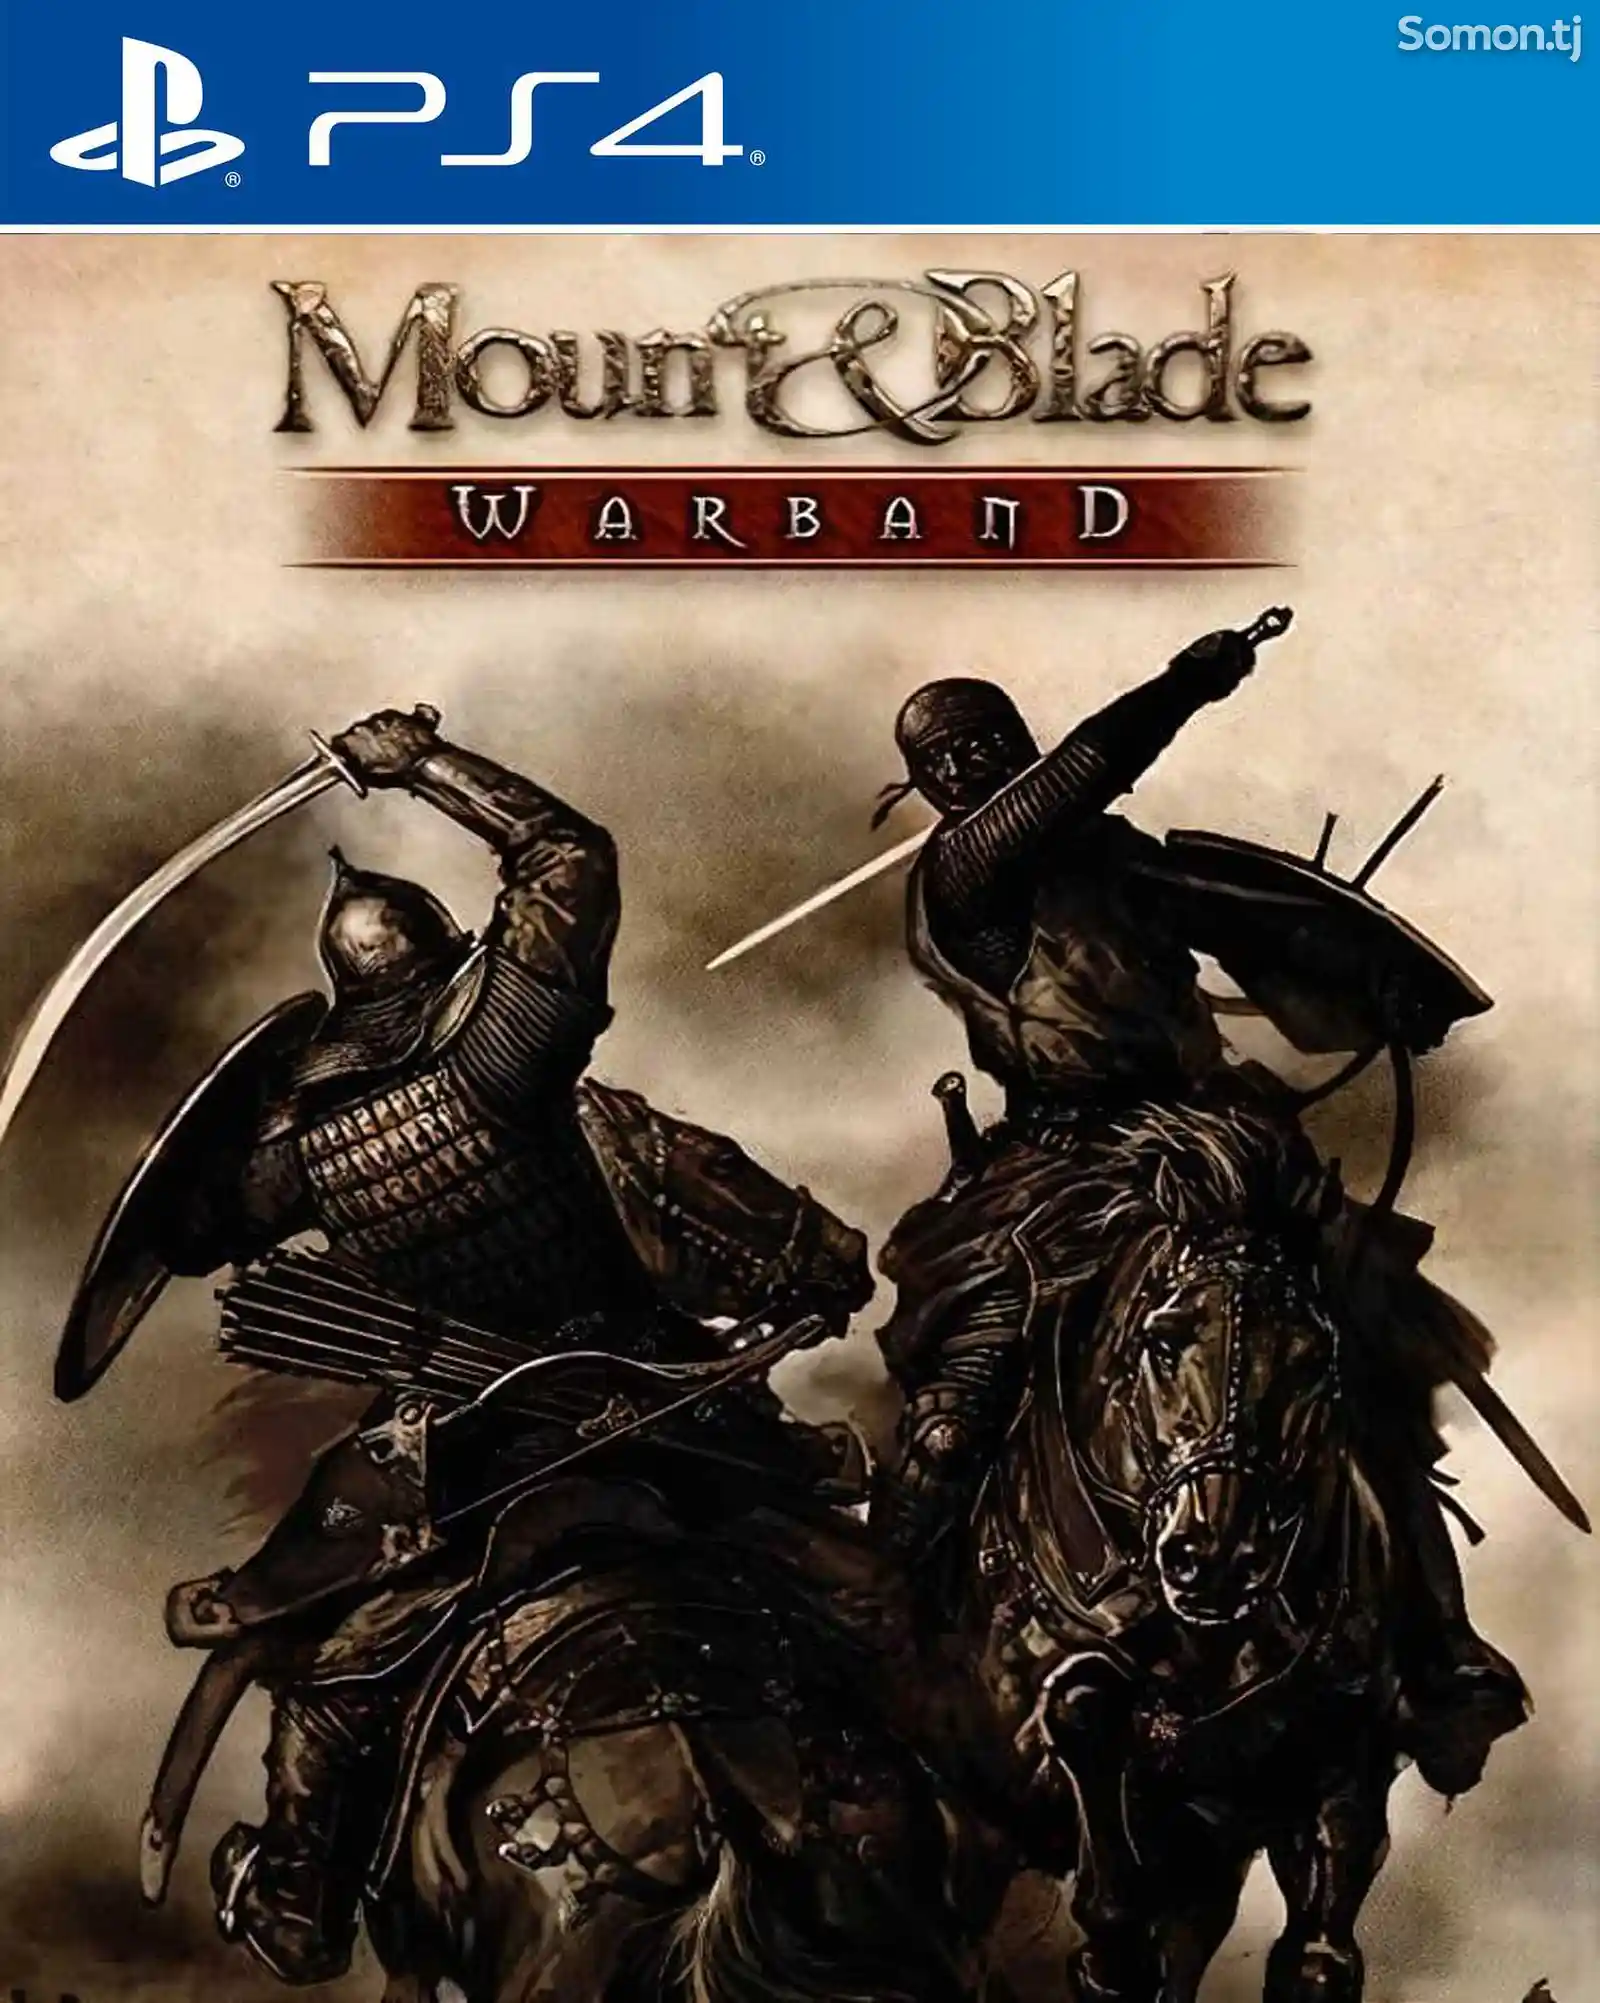 Игра Mount and blade warband для PS-4 / 5.05 / 6.72 / 7.02 / 7.55 / 9.00 /-1